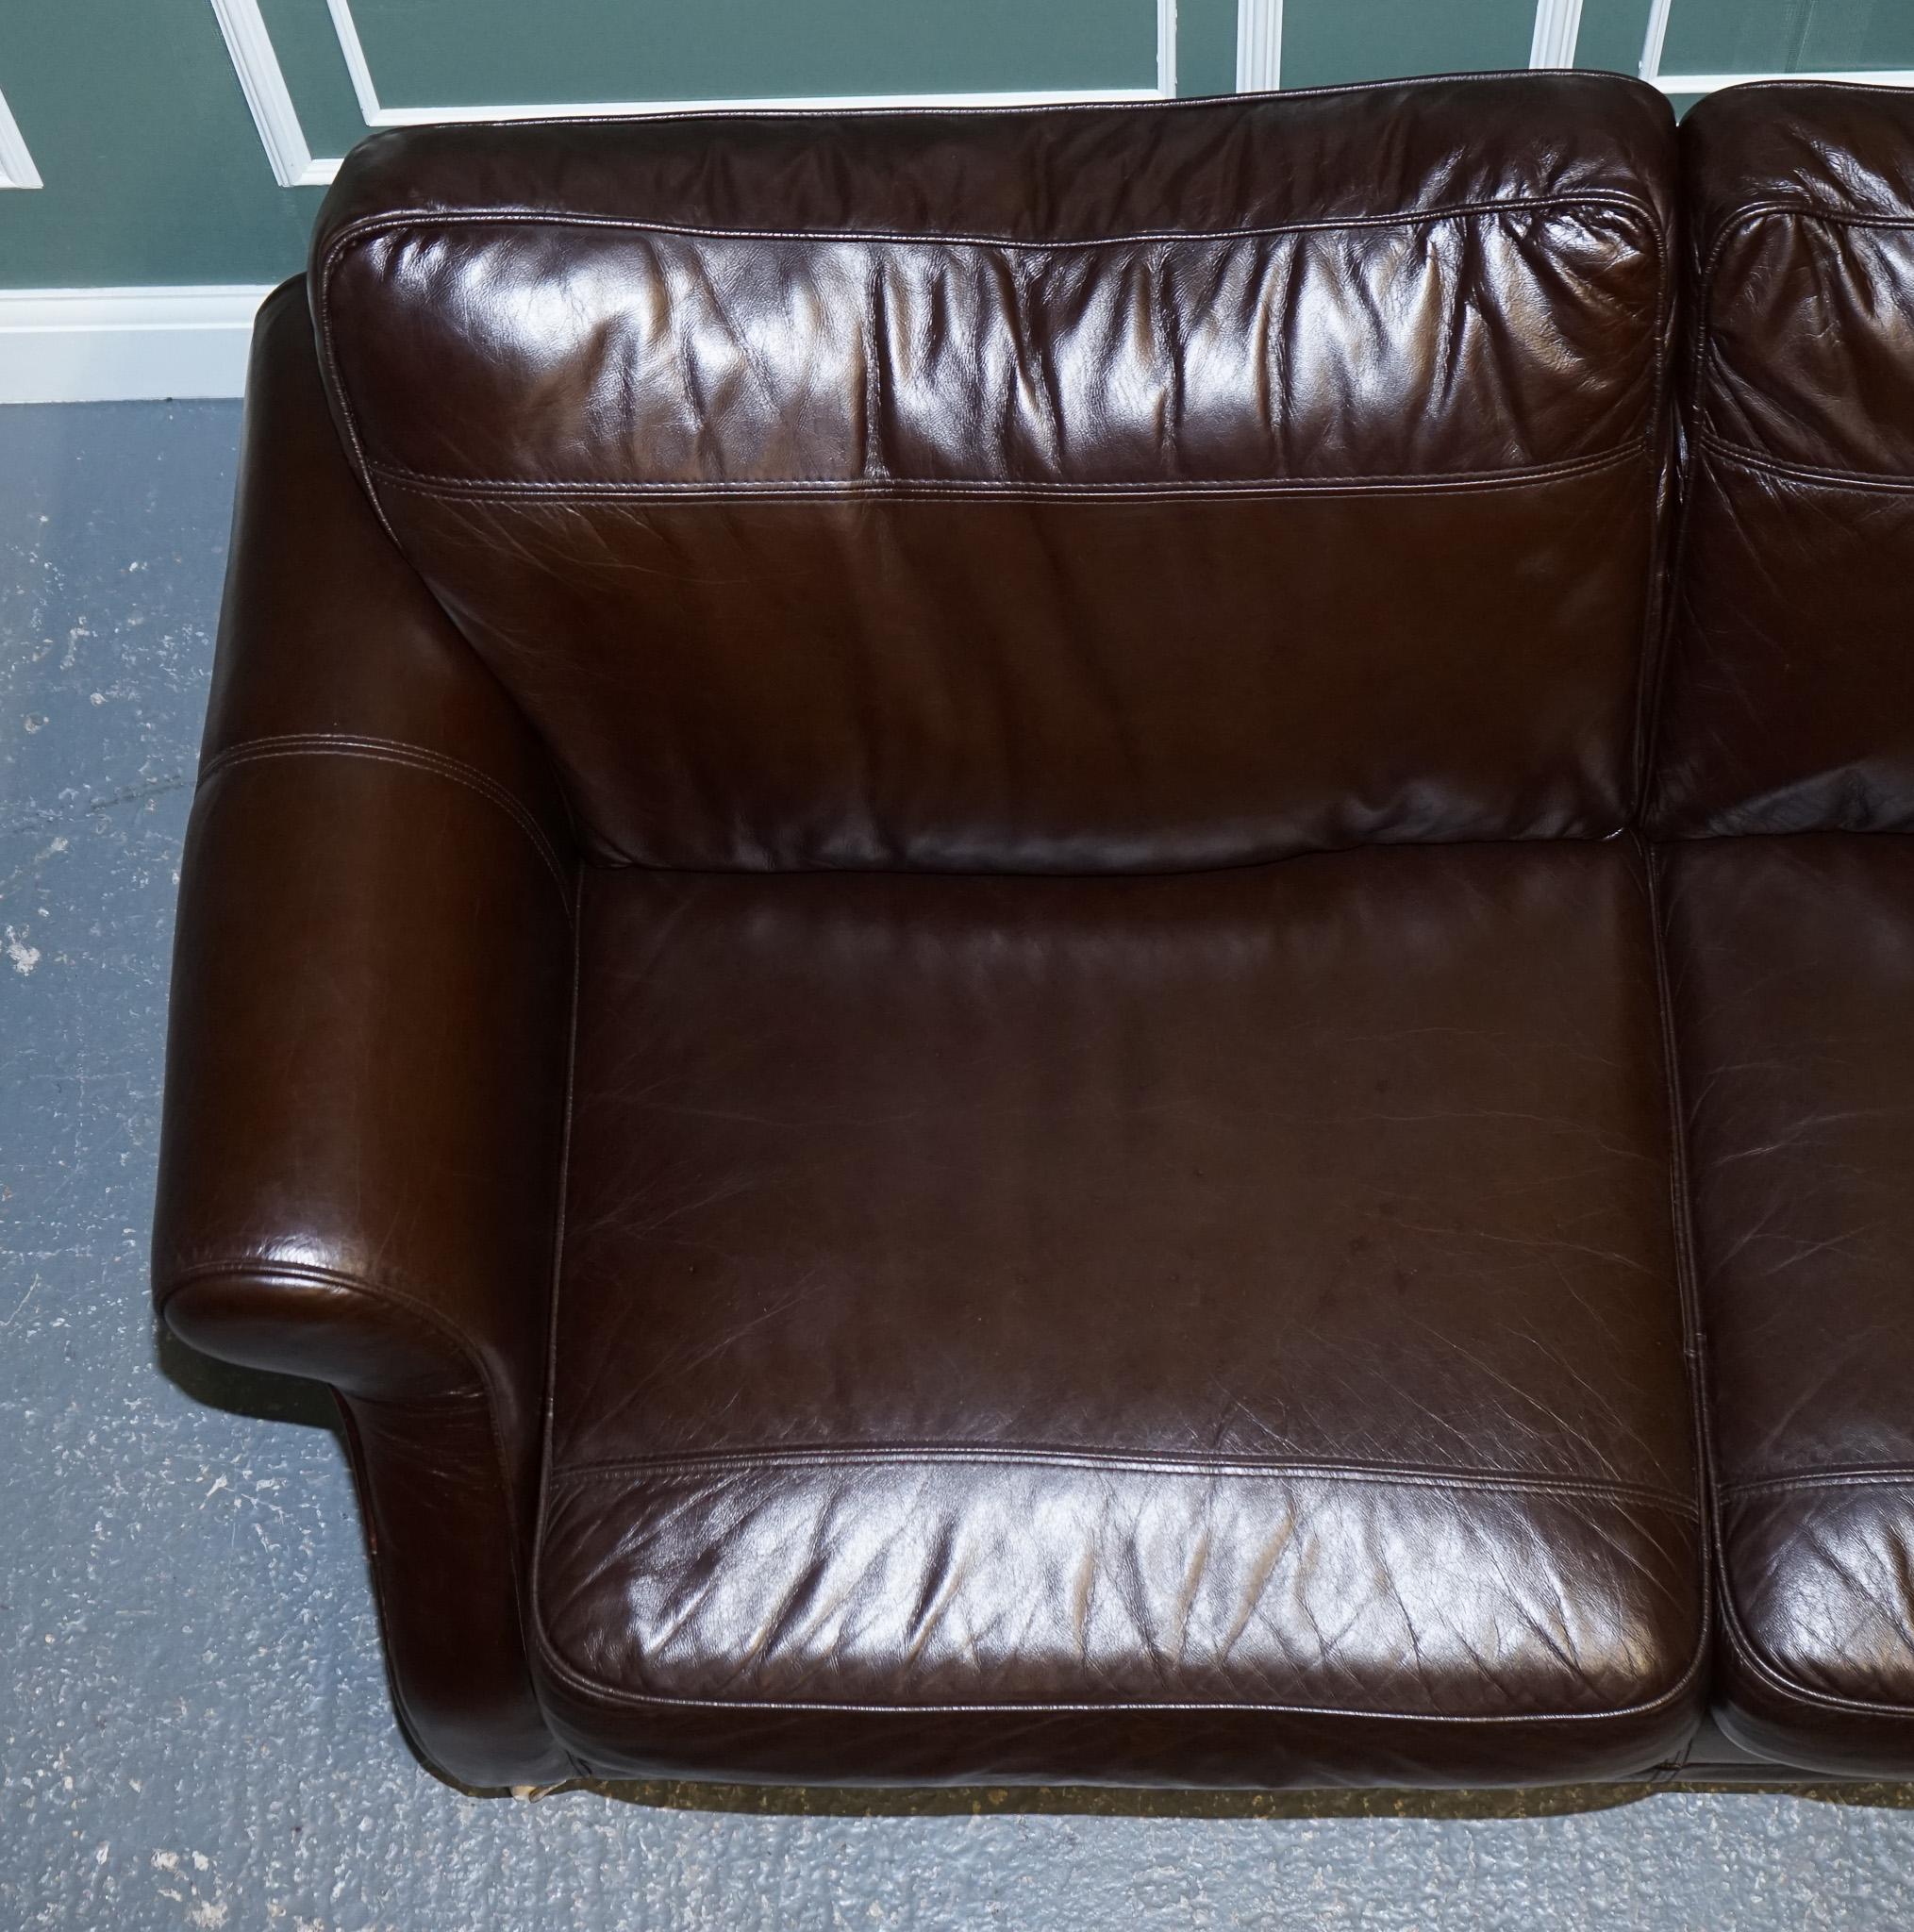 Leather VINTAGE STUNNiNG CHOCOLATE BROWN LEATHER 2 TO 3 SEATER SOFA For Sale